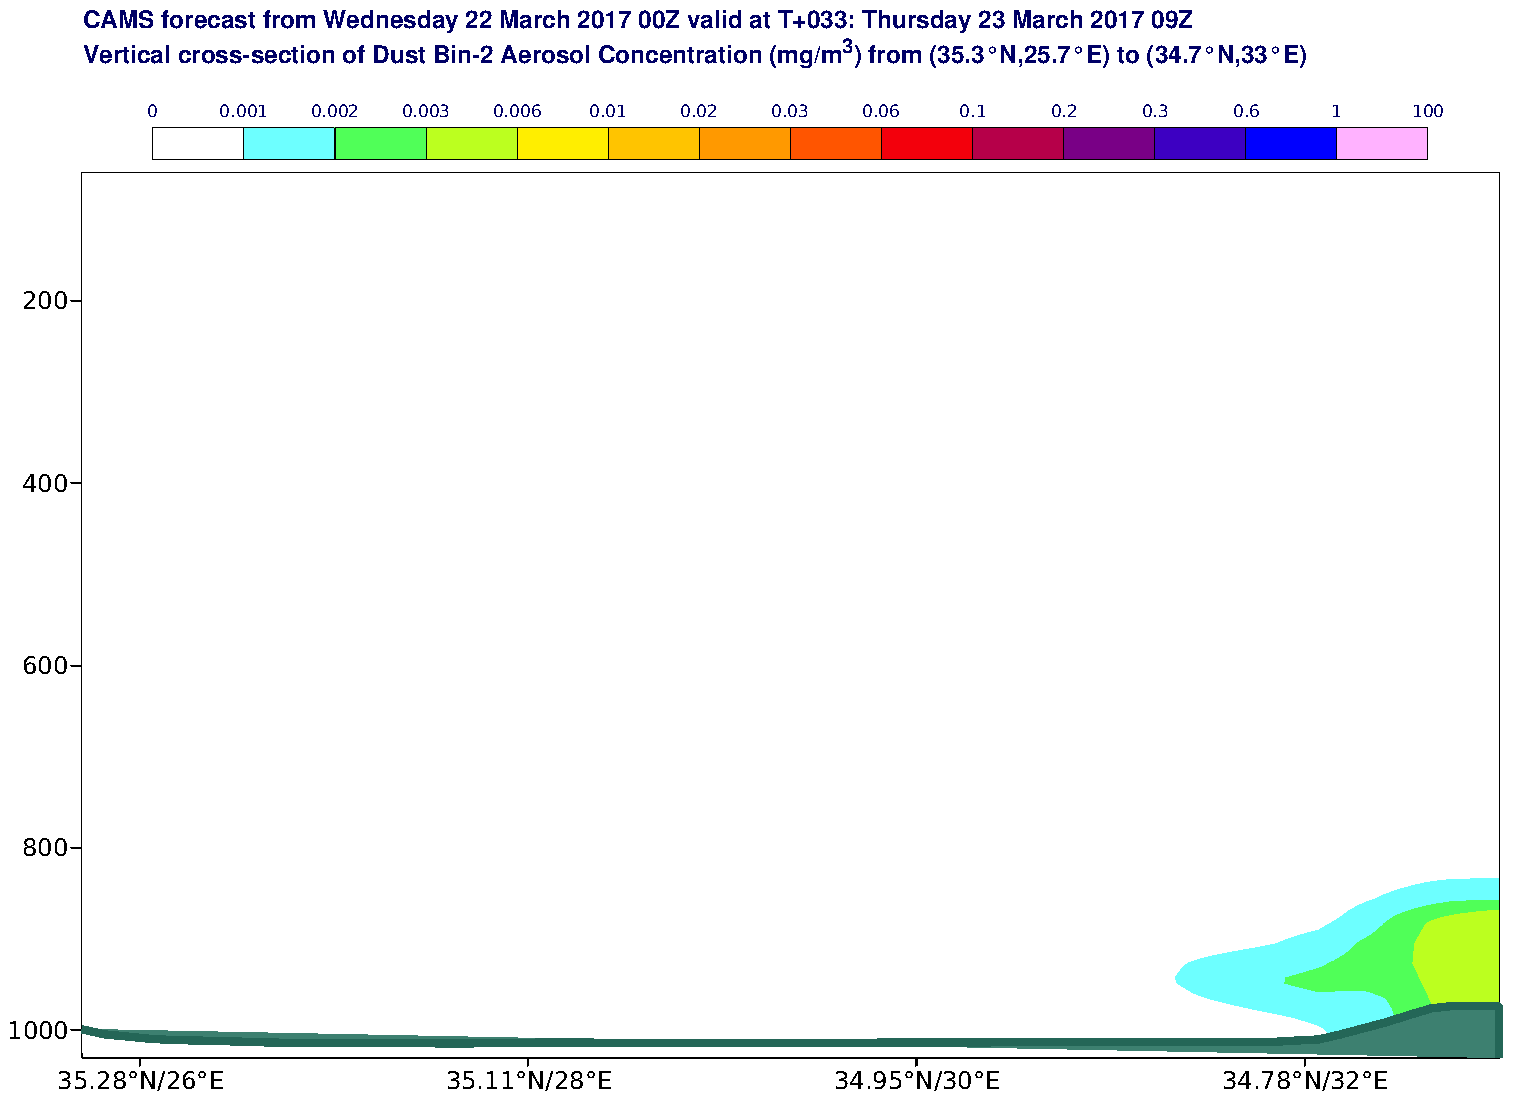 Vertical cross-section of Dust Bin-2 Aerosol Concentration (mg/m3) valid at T33 - 2017-03-23 09:00